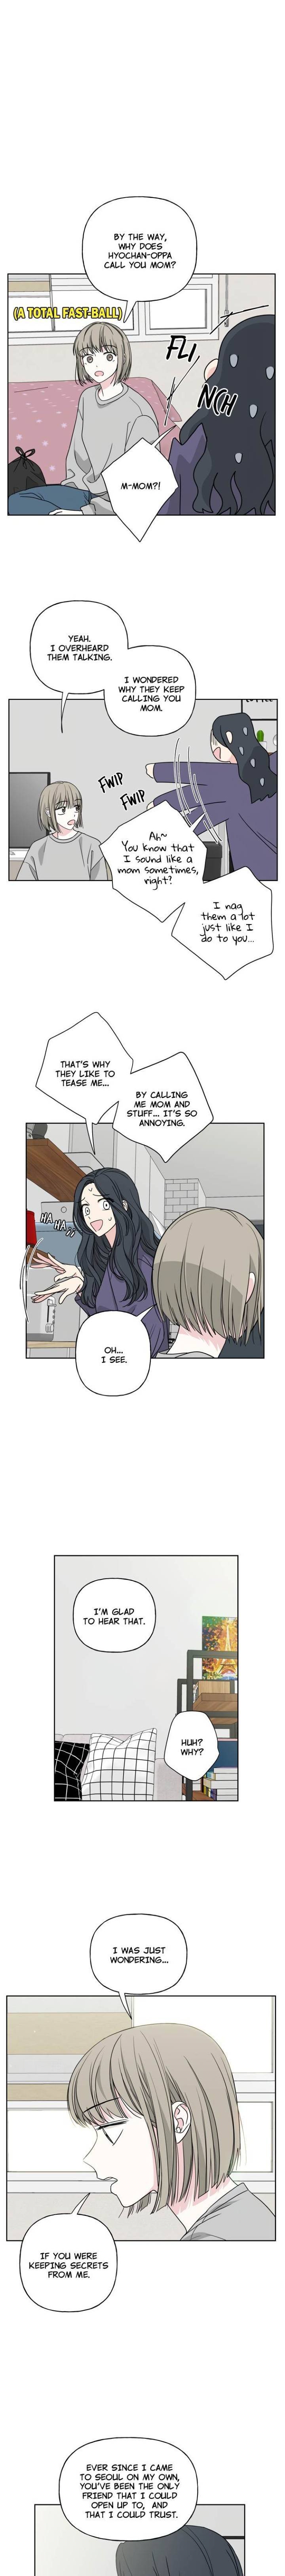 mother-im-sorry-chap-34-9